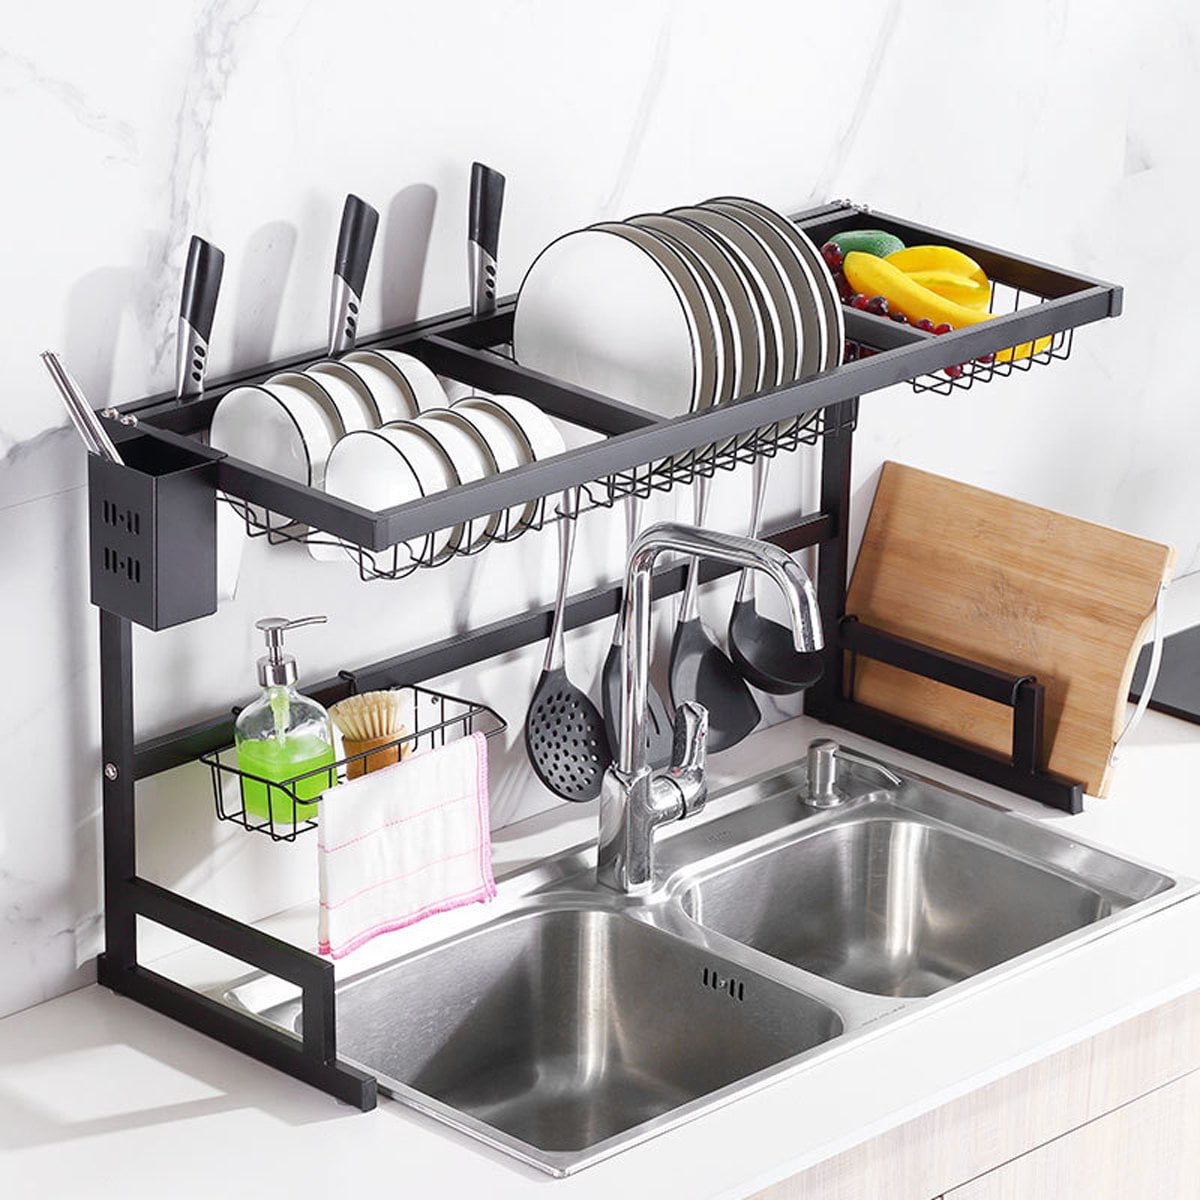 LARGE KITCHEN SINK DISH DRAINER CUTLERY PLATE CUP DRAINER HOLDER DISH RACK NEW 